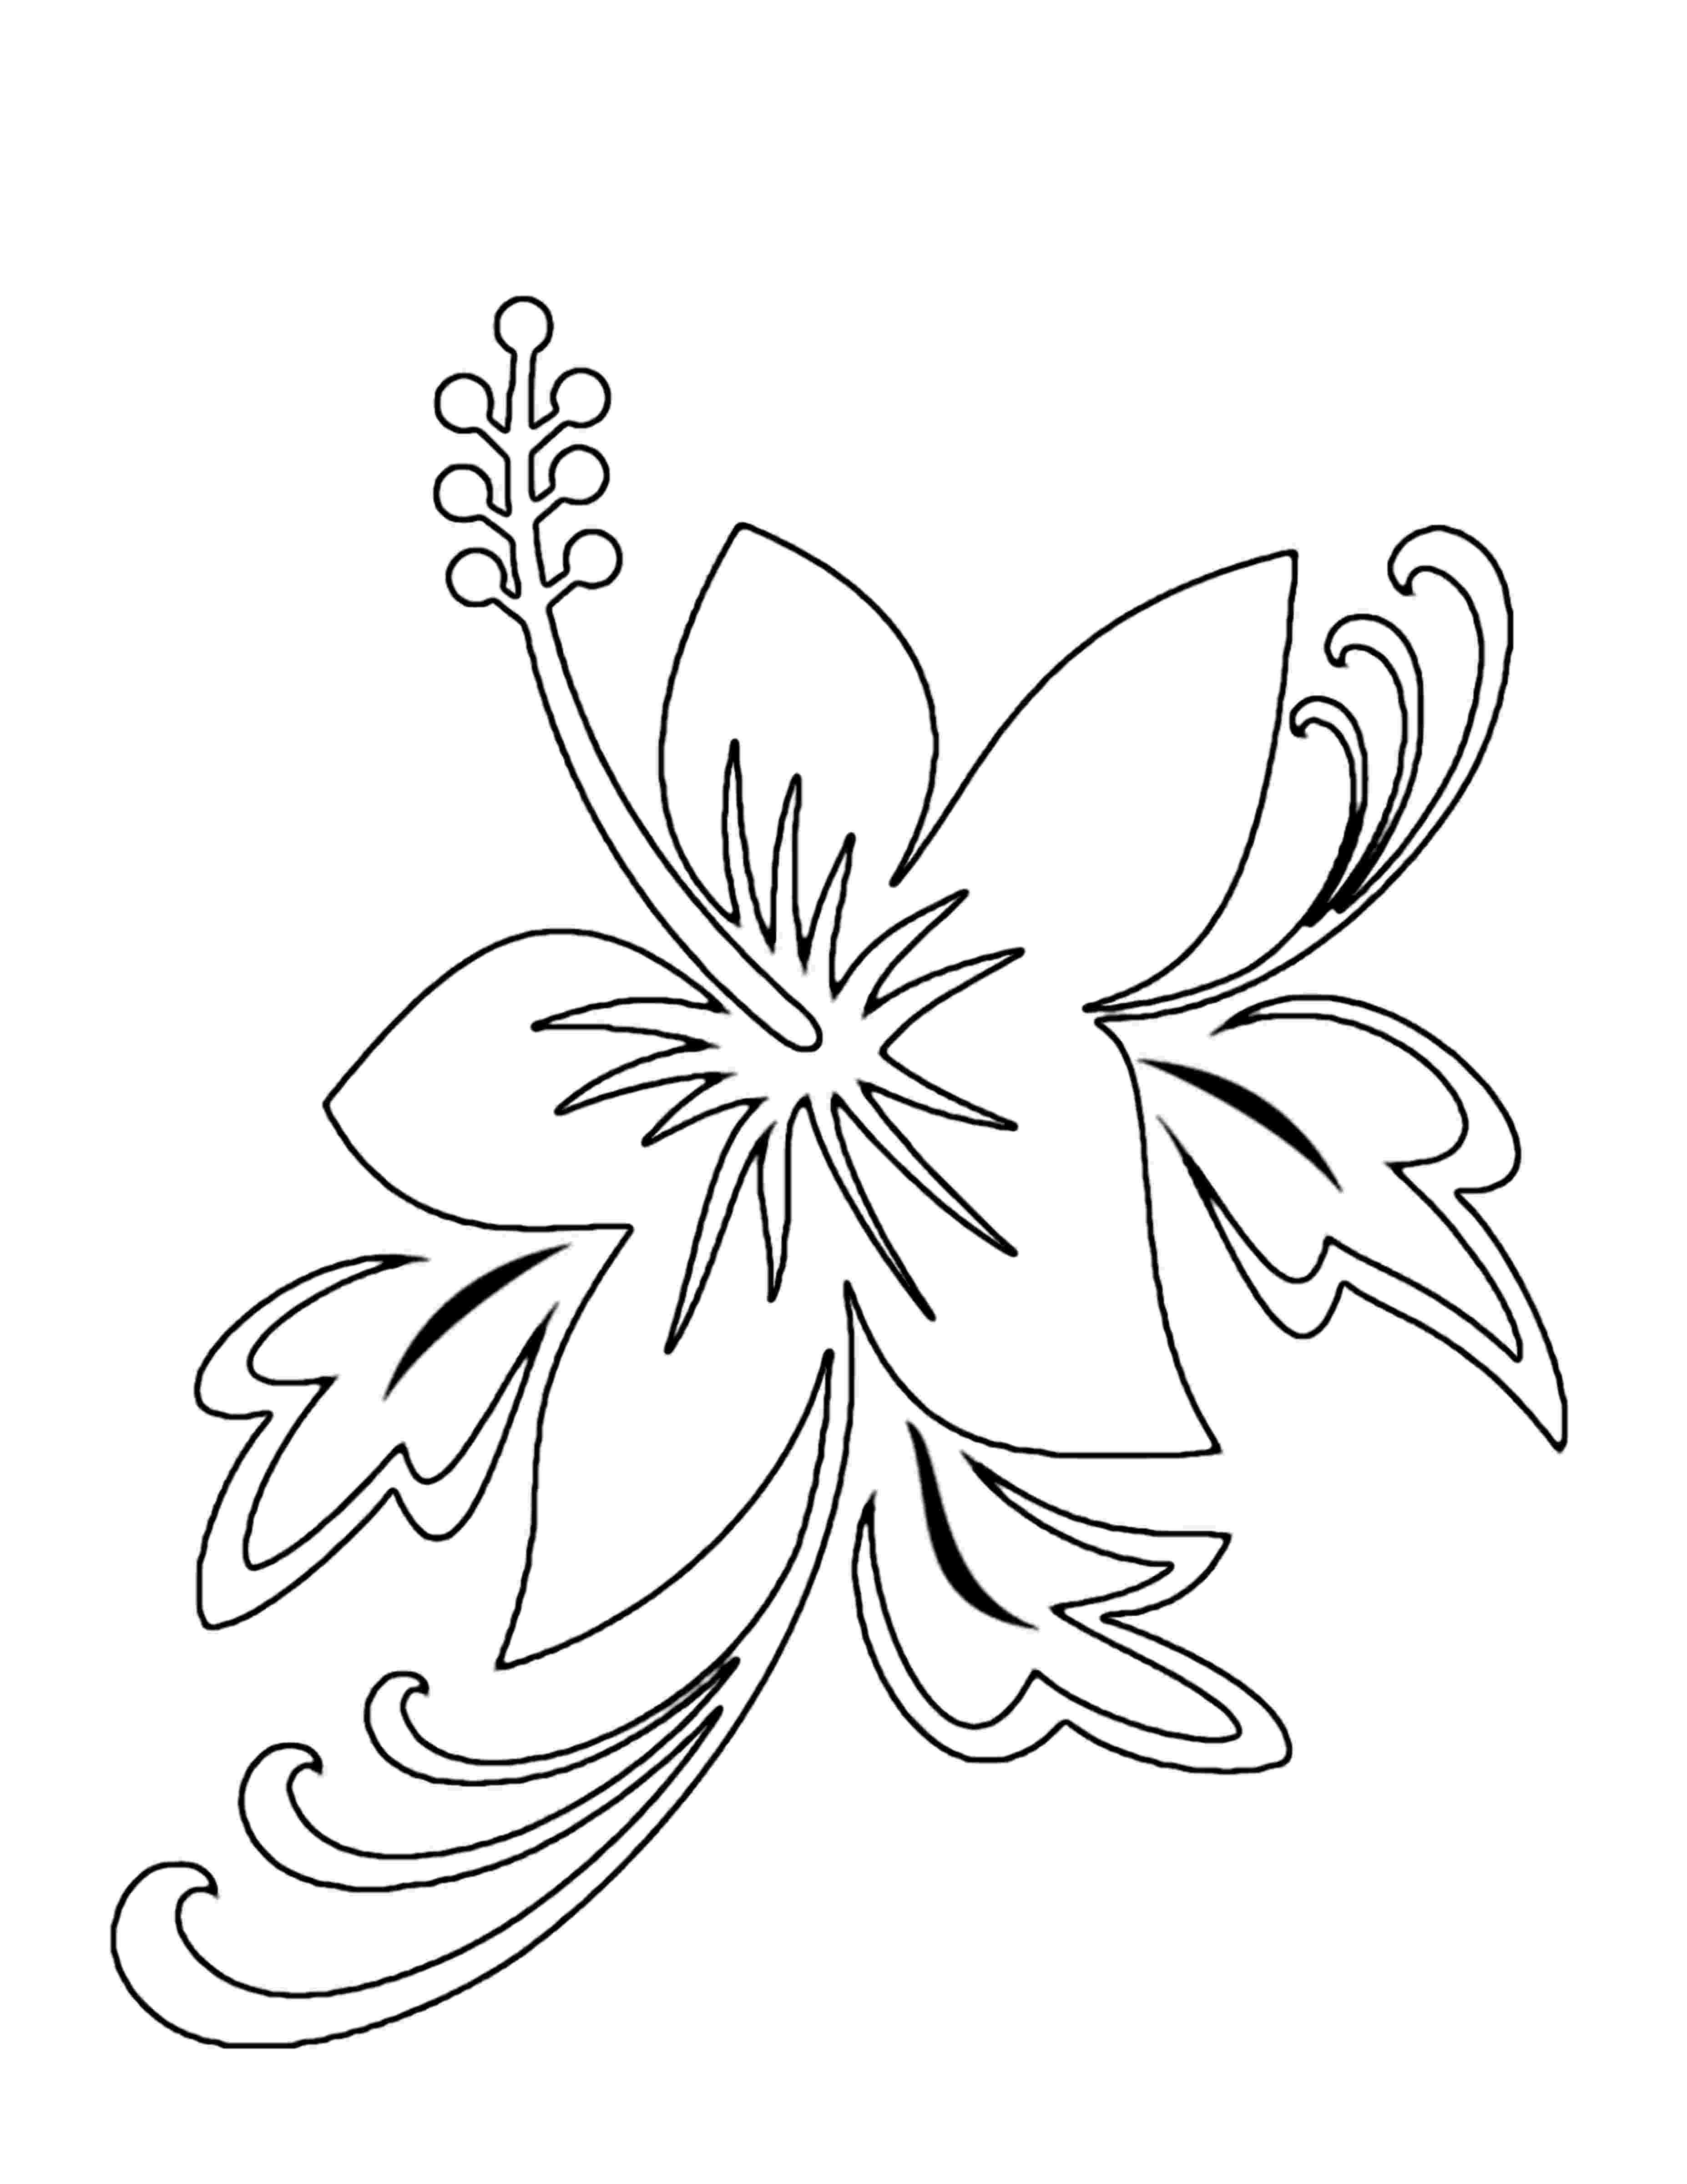 free printable coloring pages flowers free printable flower coloring pages for kids best pages free coloring printable flowers 